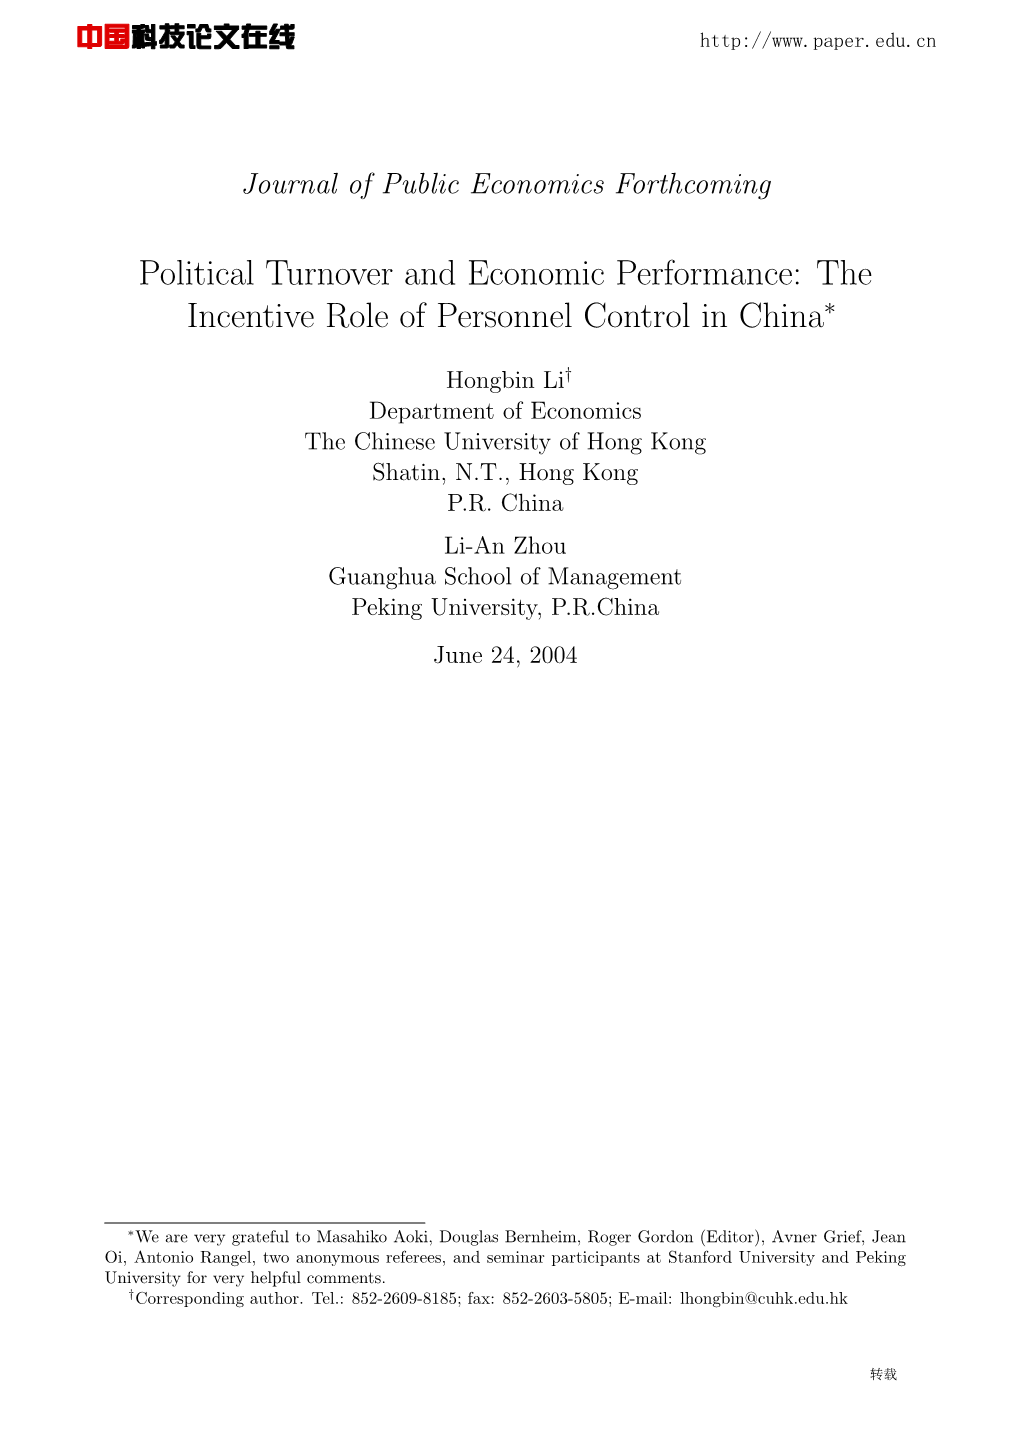 Political Turnover and Economic Performance: the Incentive Role of Personnel Control in China∗